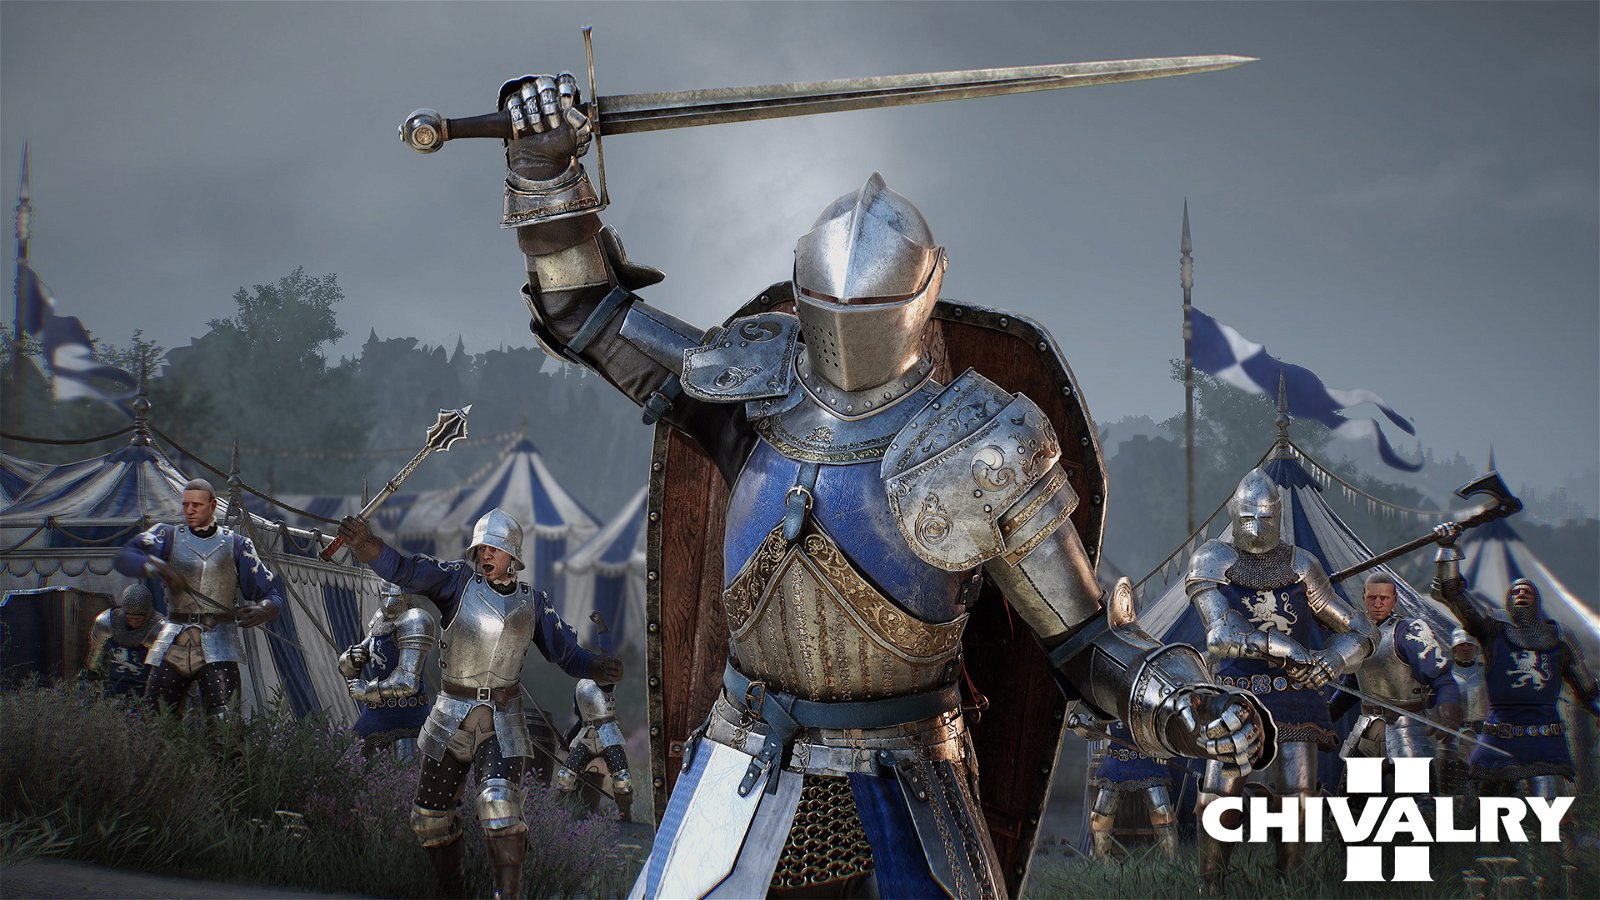 Chivalry II, Chivalry 2, Chivalry Sequel, Torn Banner Studios, Deep Silver, Tripwire Presents, PlayStation 4, PS4, XONE, Xbox One, trailer, release date, Switch, North America, US, Europe, pre-order, price, gameplay, features